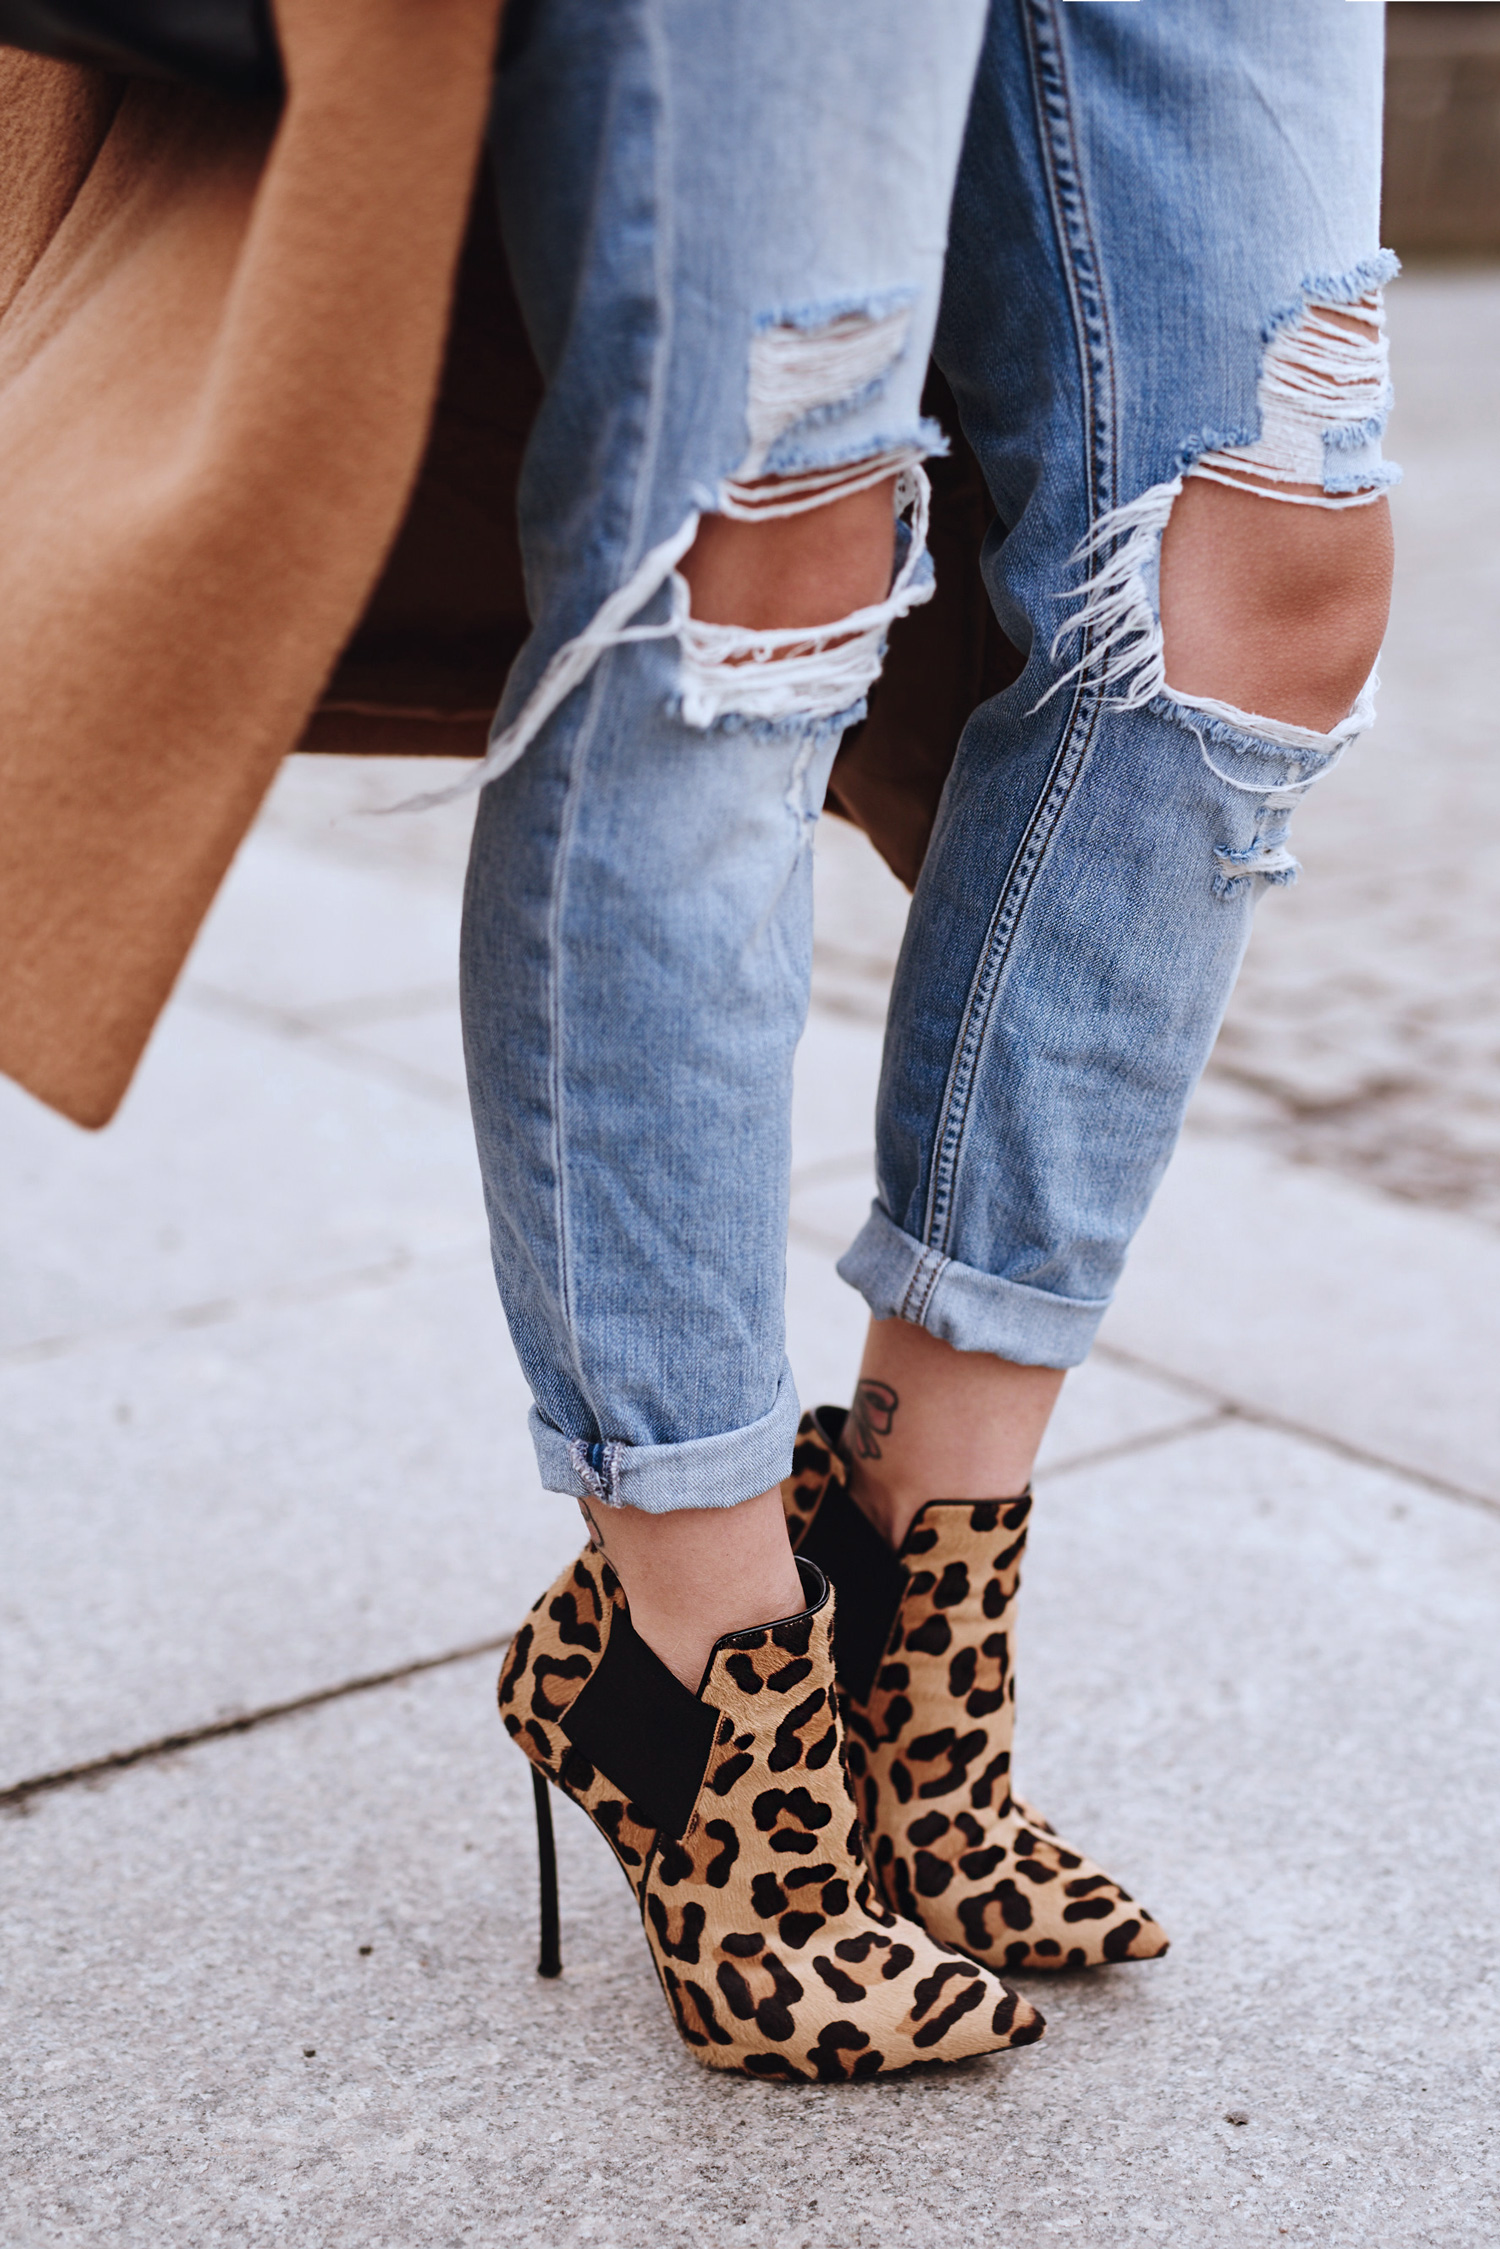 view more details on my blog | blue jeans & leo shoes | outfit, fashion, style